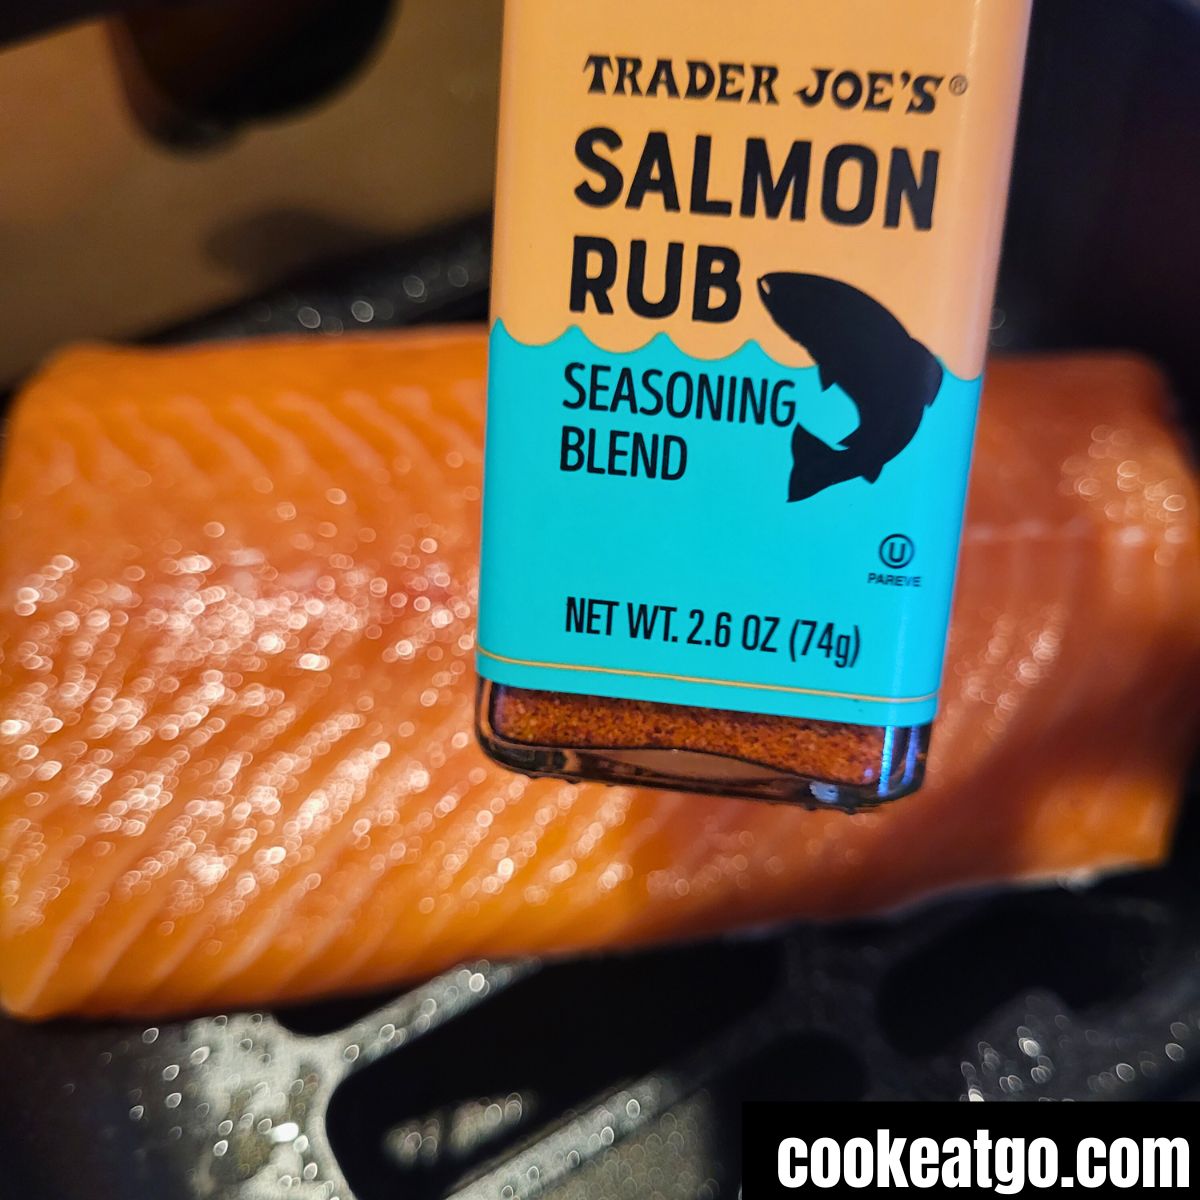 Trader Joes Salmon Rub above a fillet of salmon in air fryer basket